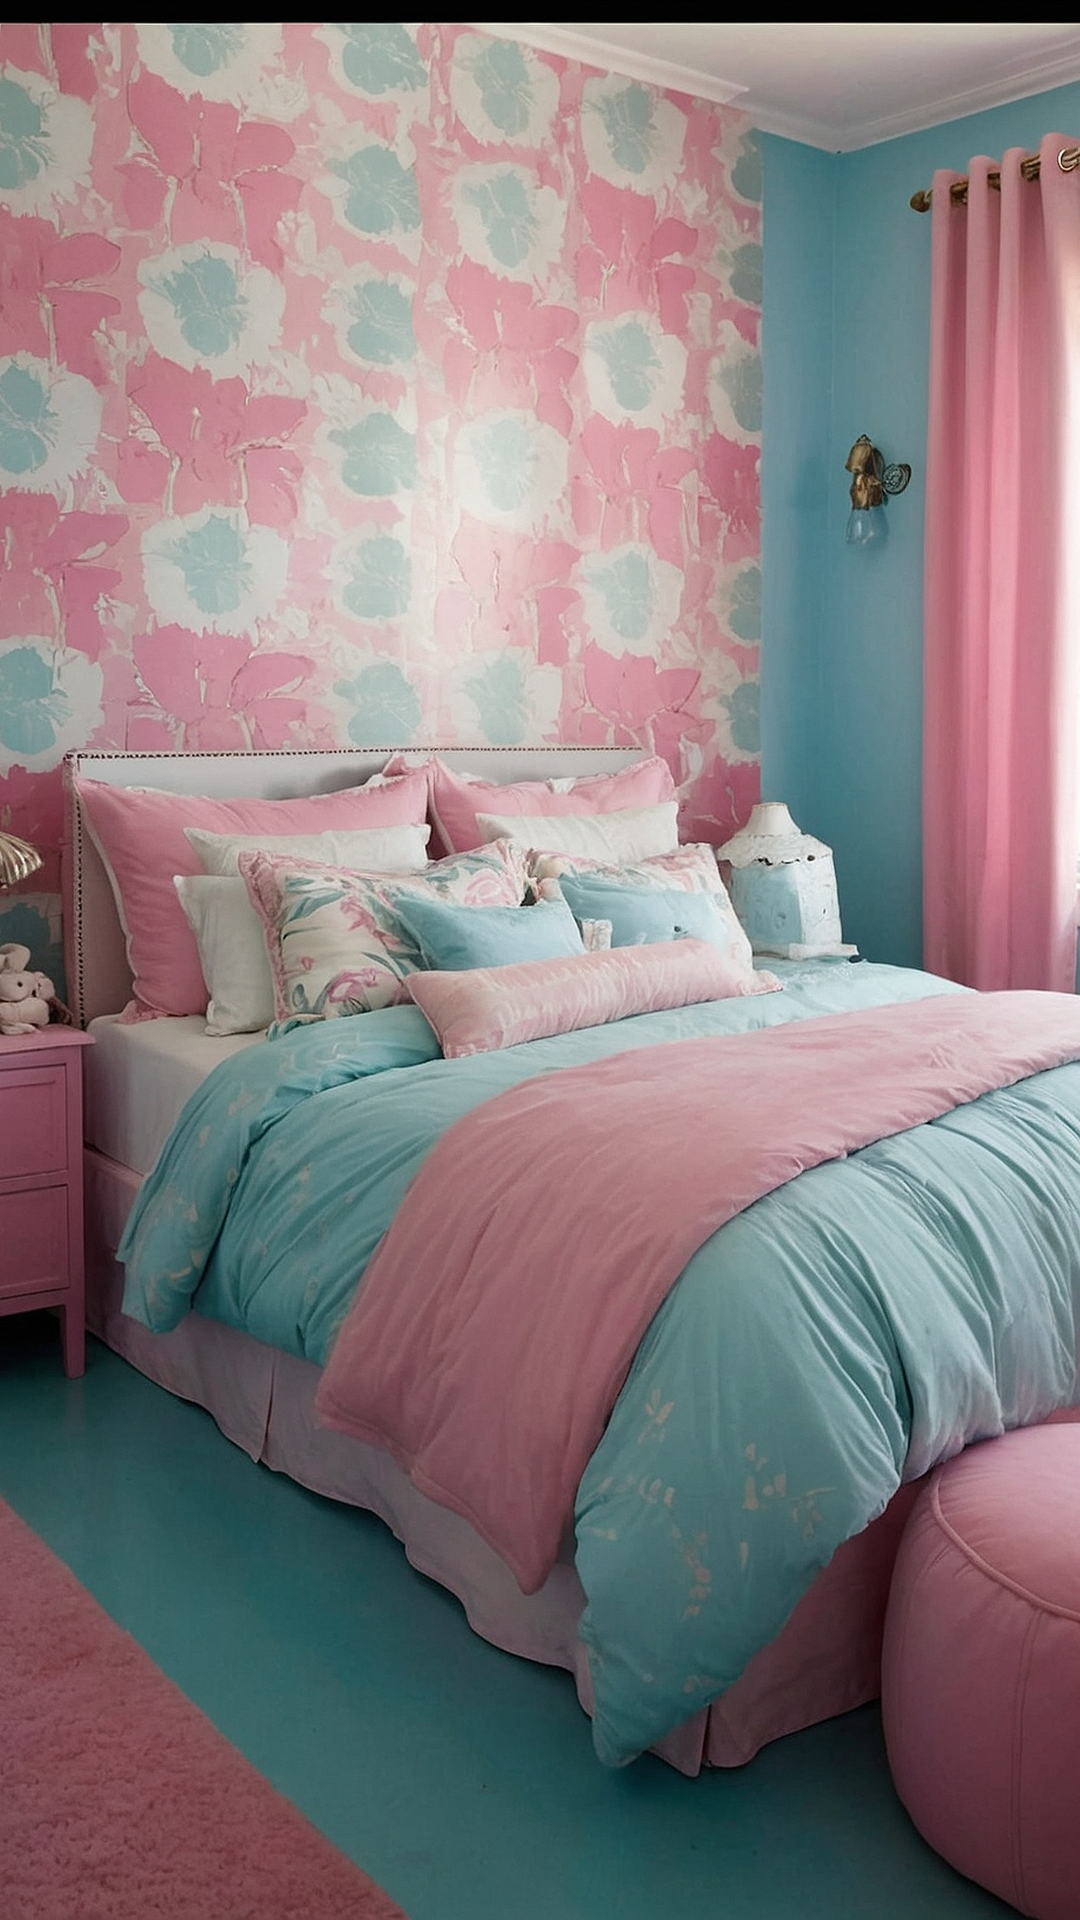 Pretty in Pink: Bedroom Makeover Inspiration